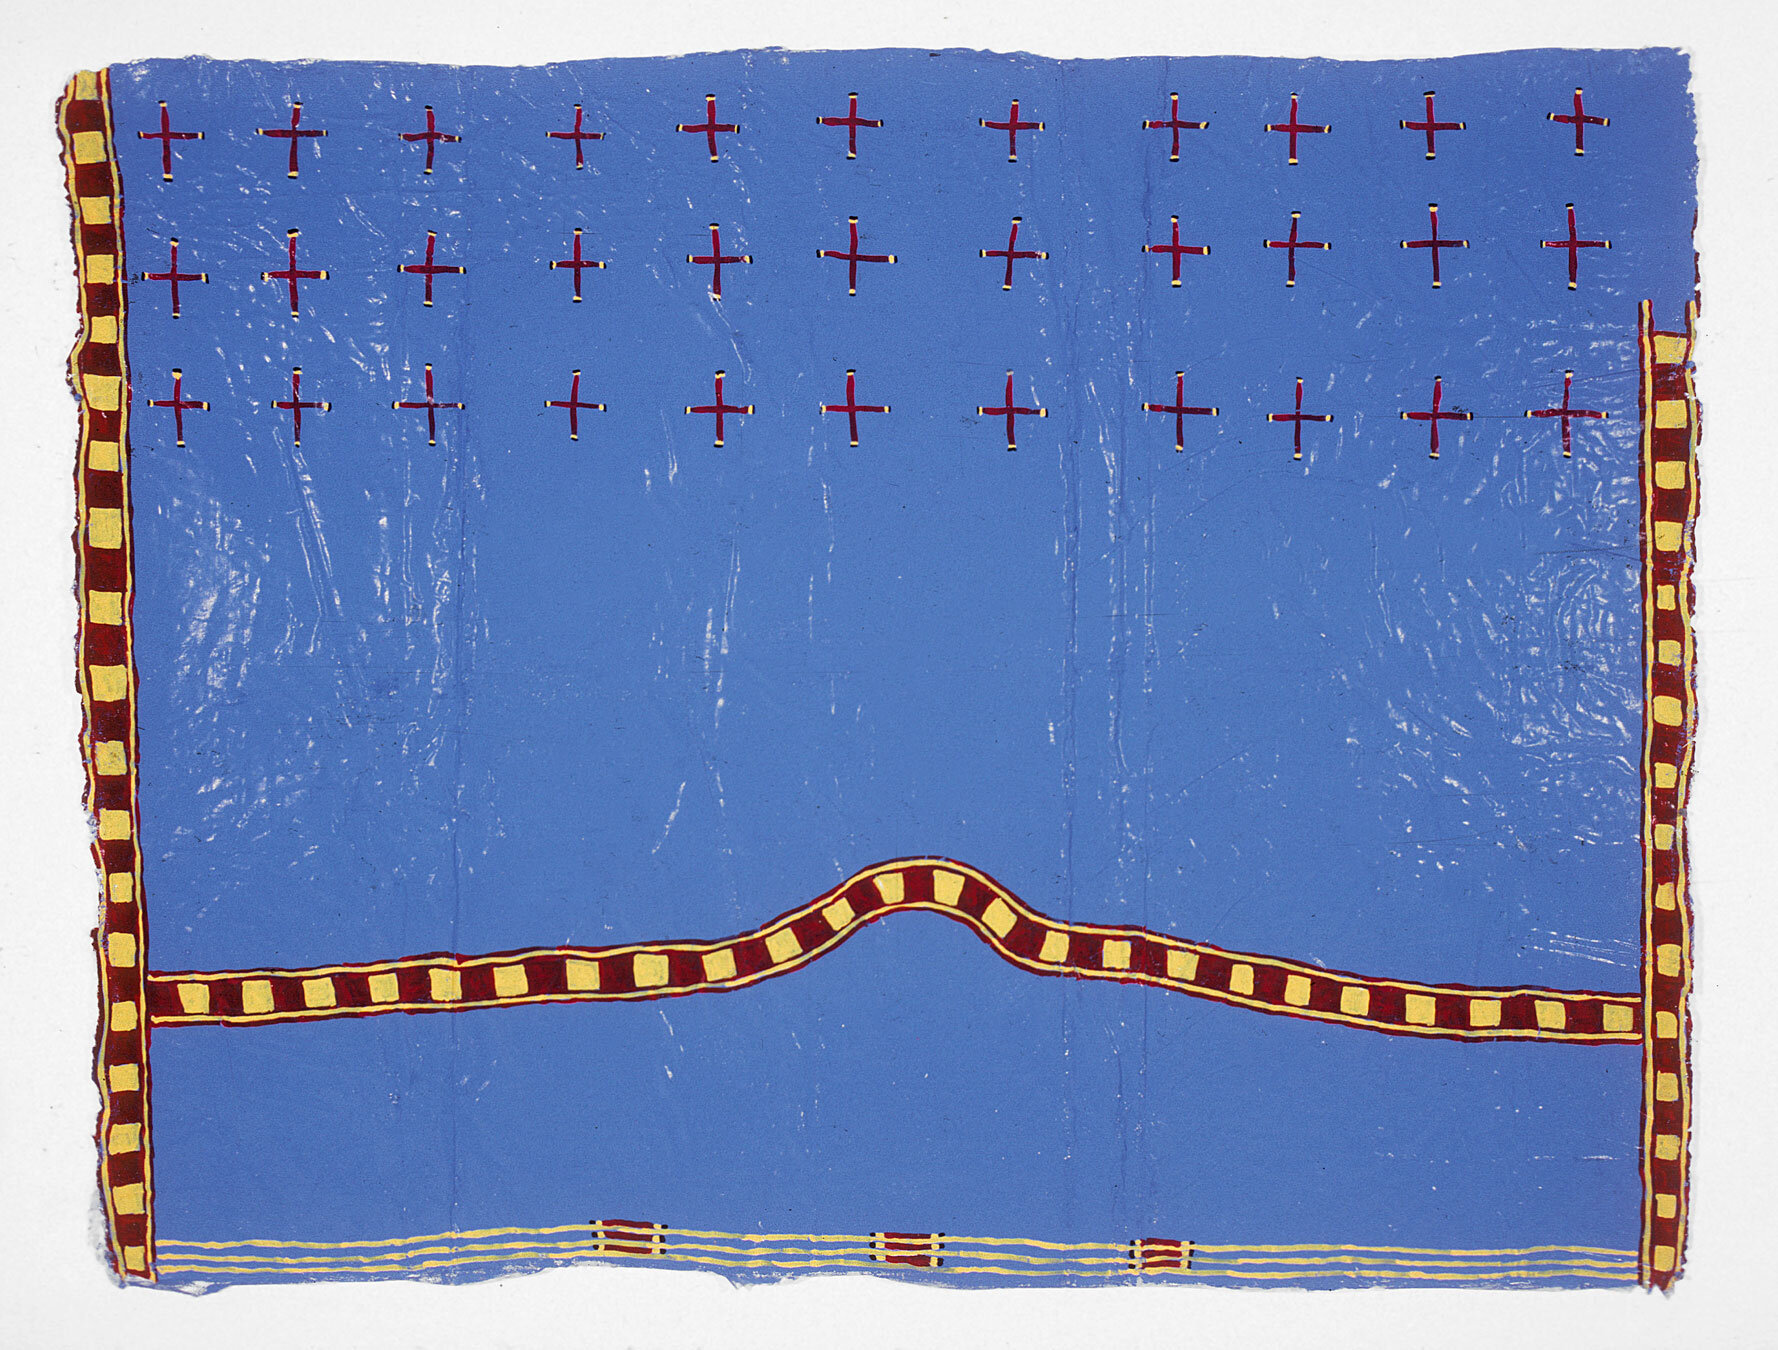   Crosses in Blue , 1980, cheesecloth, latex enamel, gesso, 65 x 85 inches 